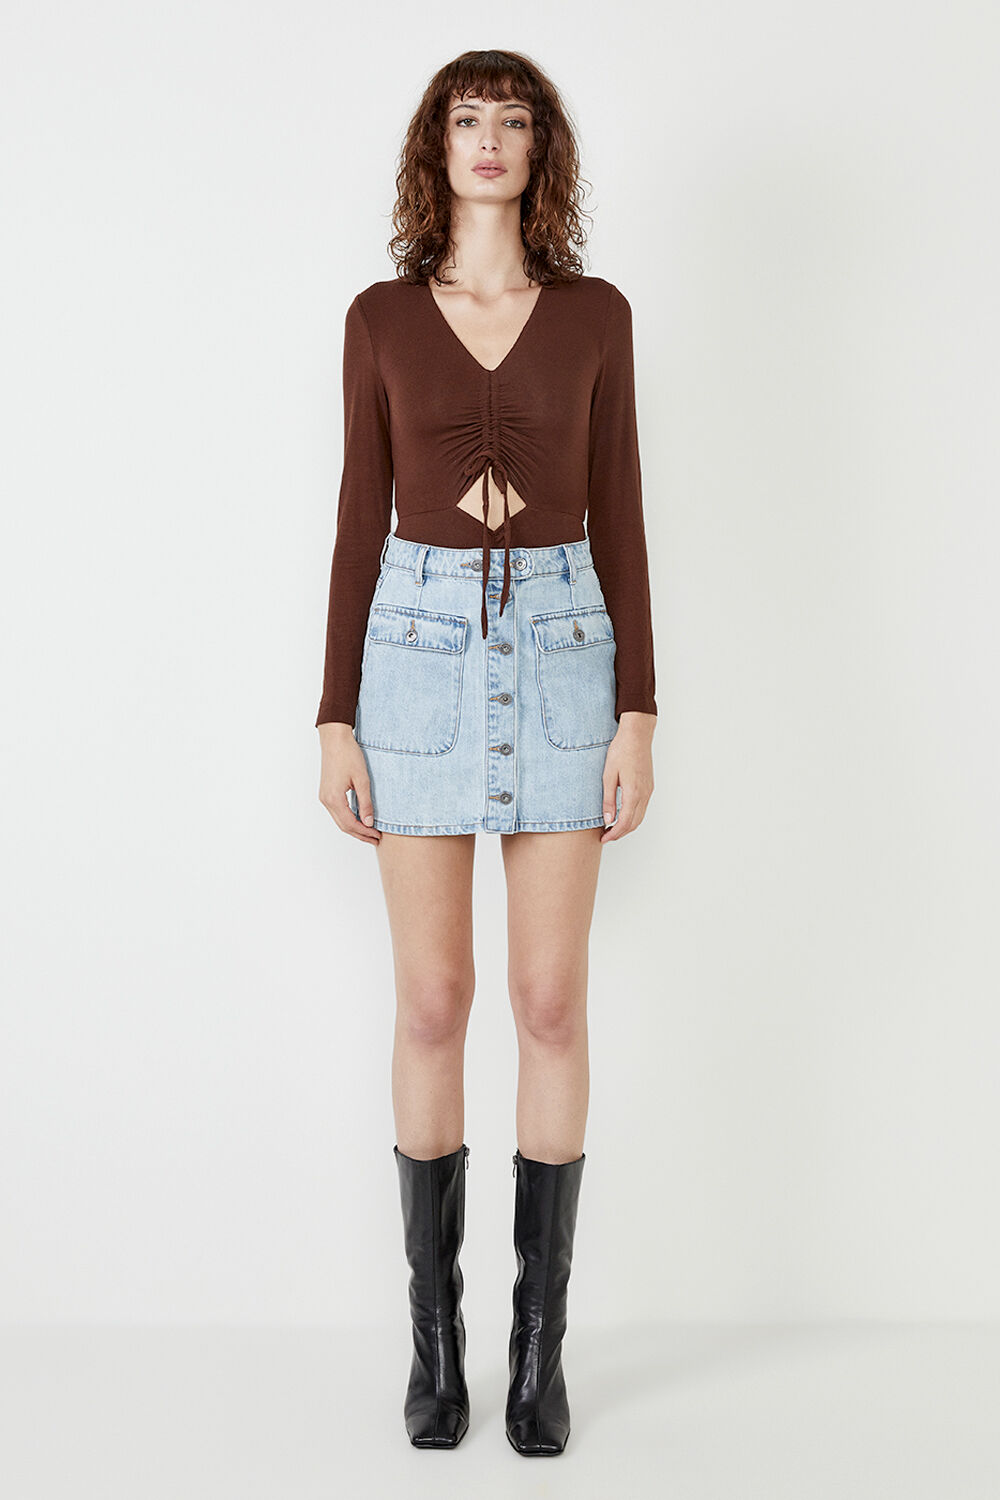 RUCHED BODYSUIT in colour CHOCOLATE BROWN